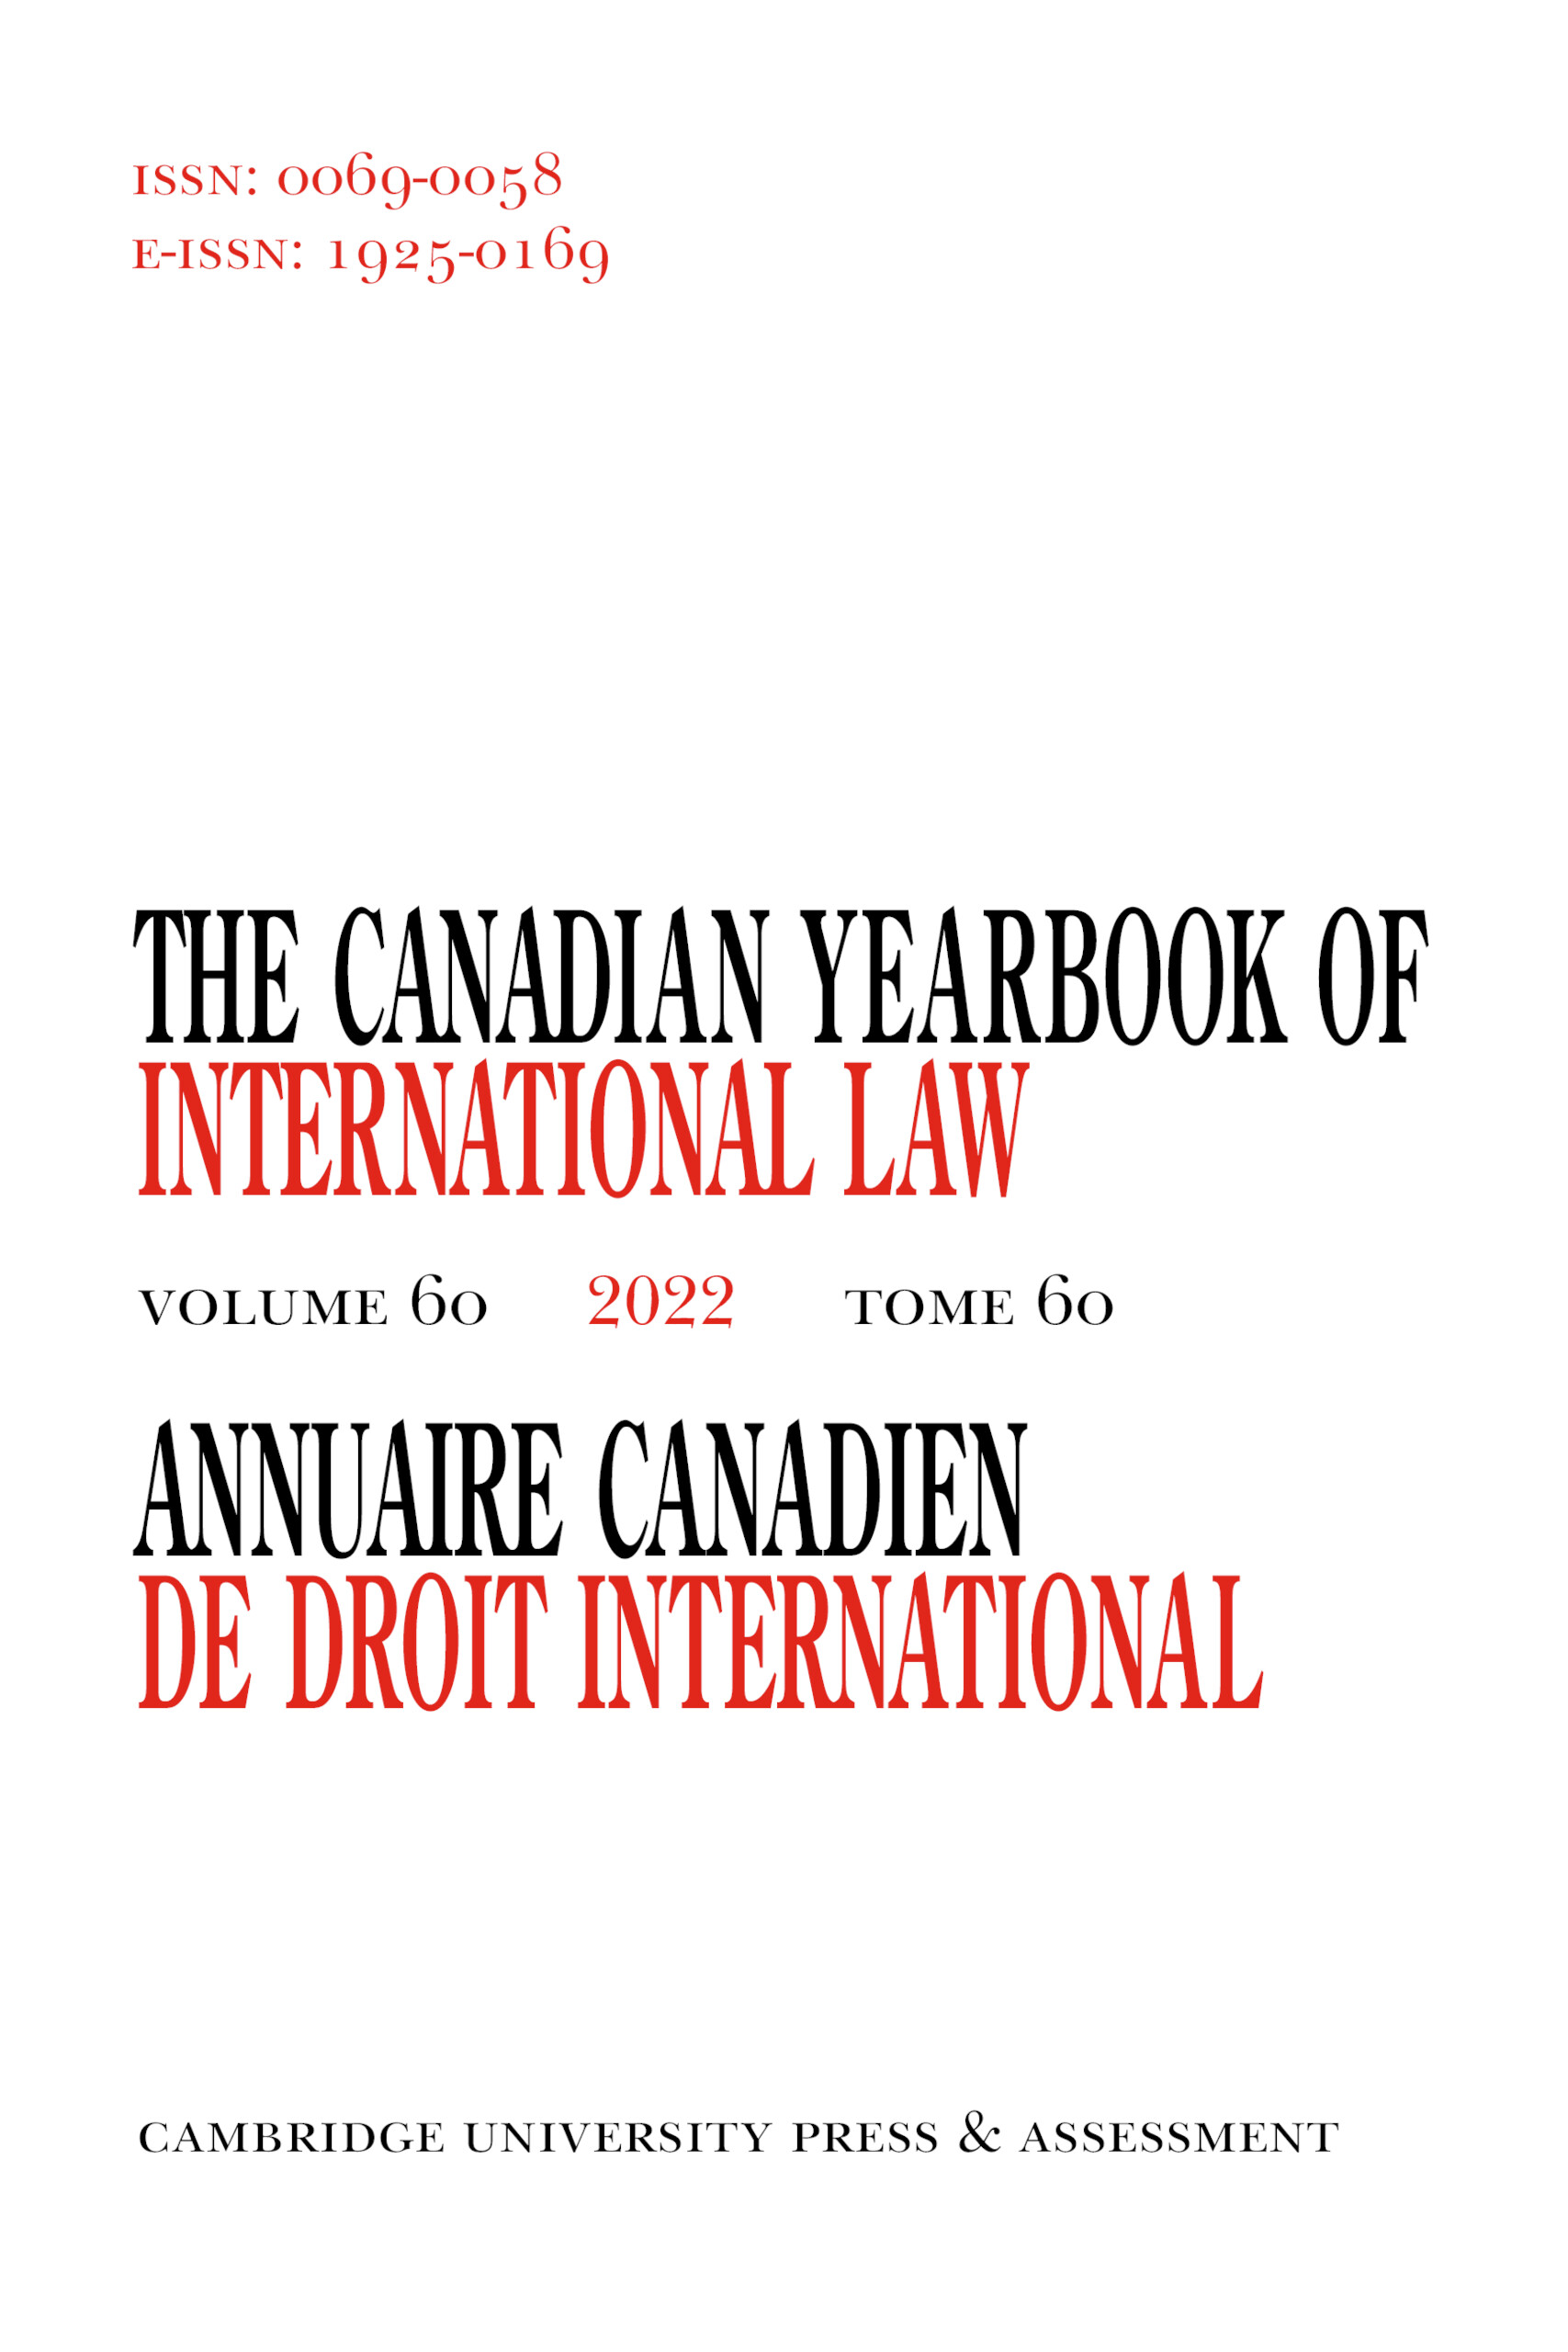 Canadian Yearbook of International Law / Annuaire canadien de droit international